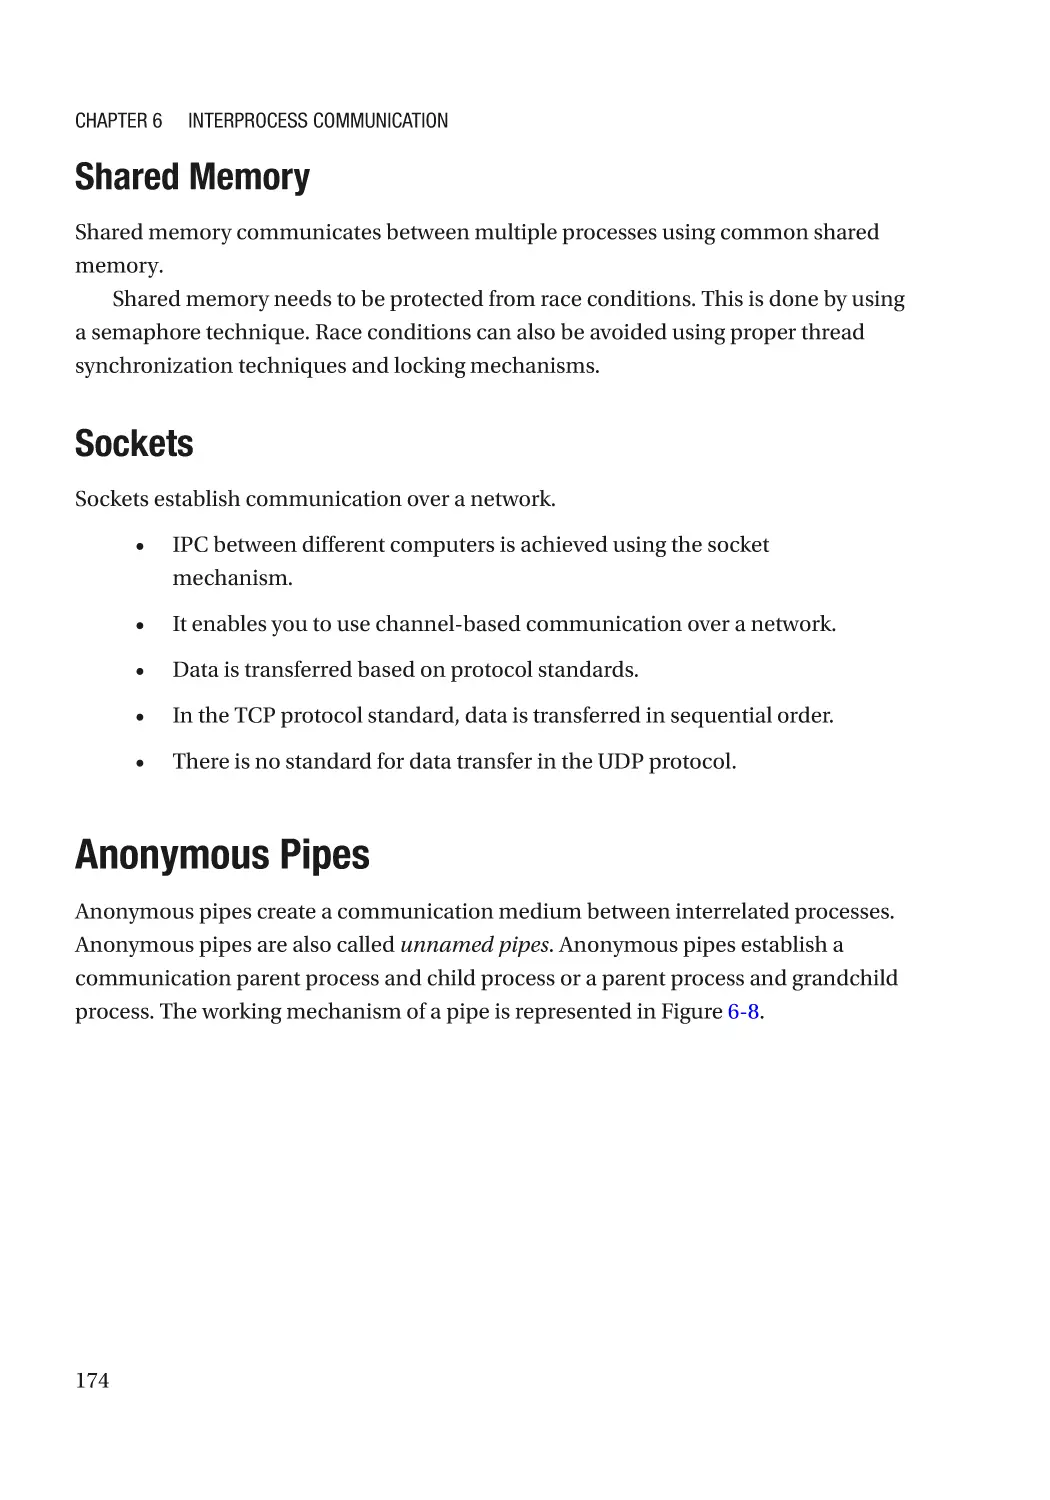 Shared Memory
Sockets
Anonymous Pipes